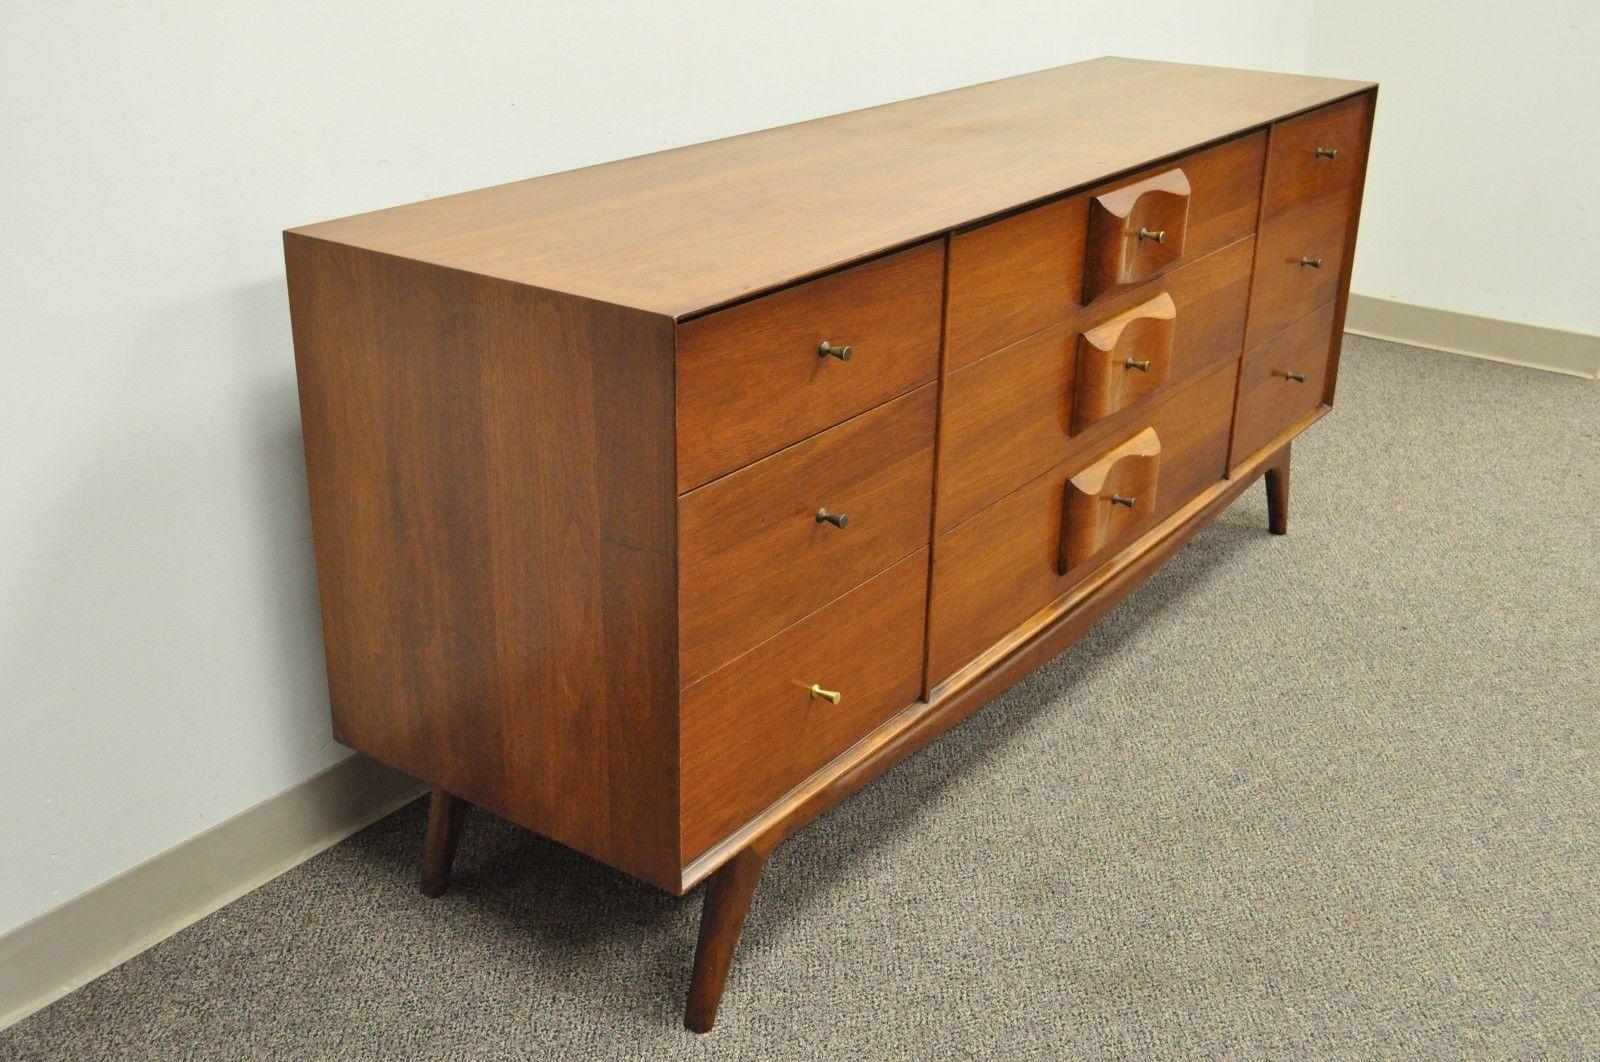 Vintage walnut long dresser by Carlton House Fine Furniture / Oscar Friedman Furniture Company. Item features walnut construction, sculpted drawer fronts and stretcher, angled and tapered legs, nine dovetailed drawers, brass hour glass pulls, clean